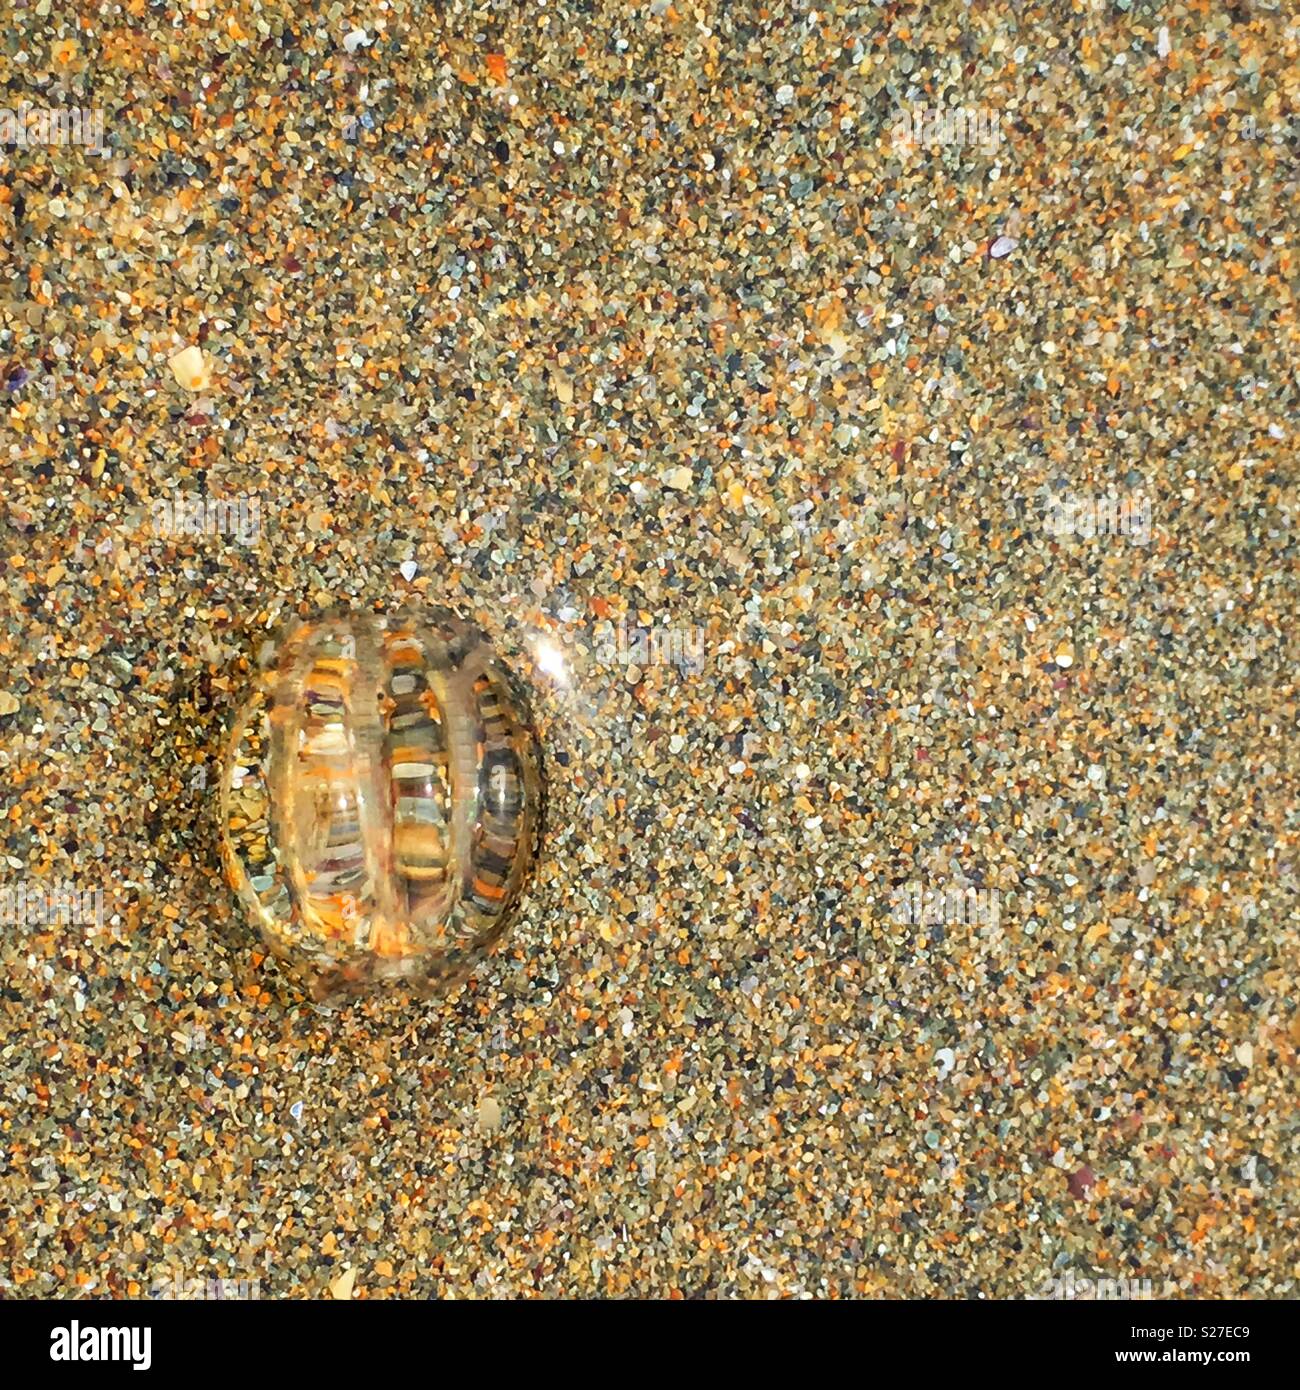 A view of a sea gooseberry from on top. Transparent and ribbed they are also known as ‘comb jellies’. Scientific name Ctenophora. Stock Photo